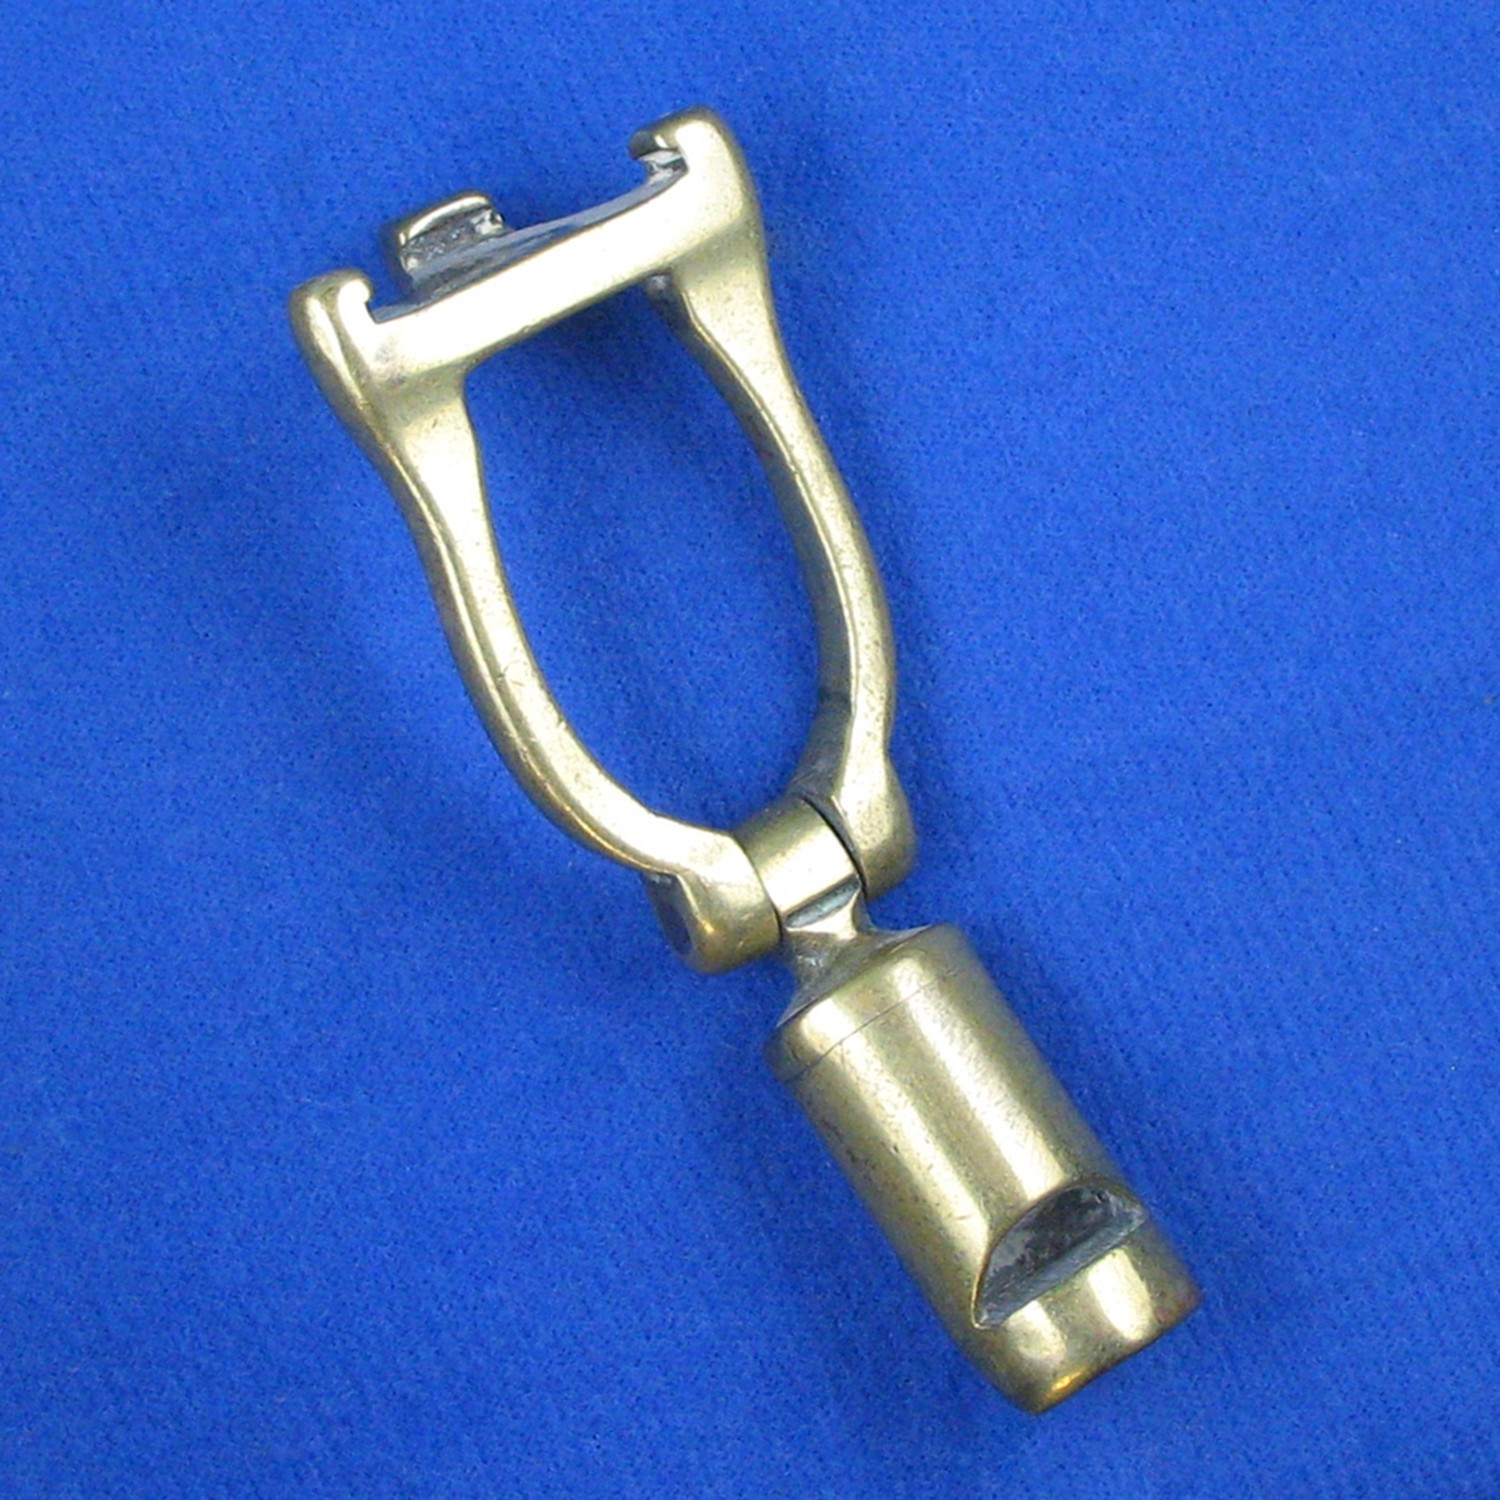 extractor whistle categories